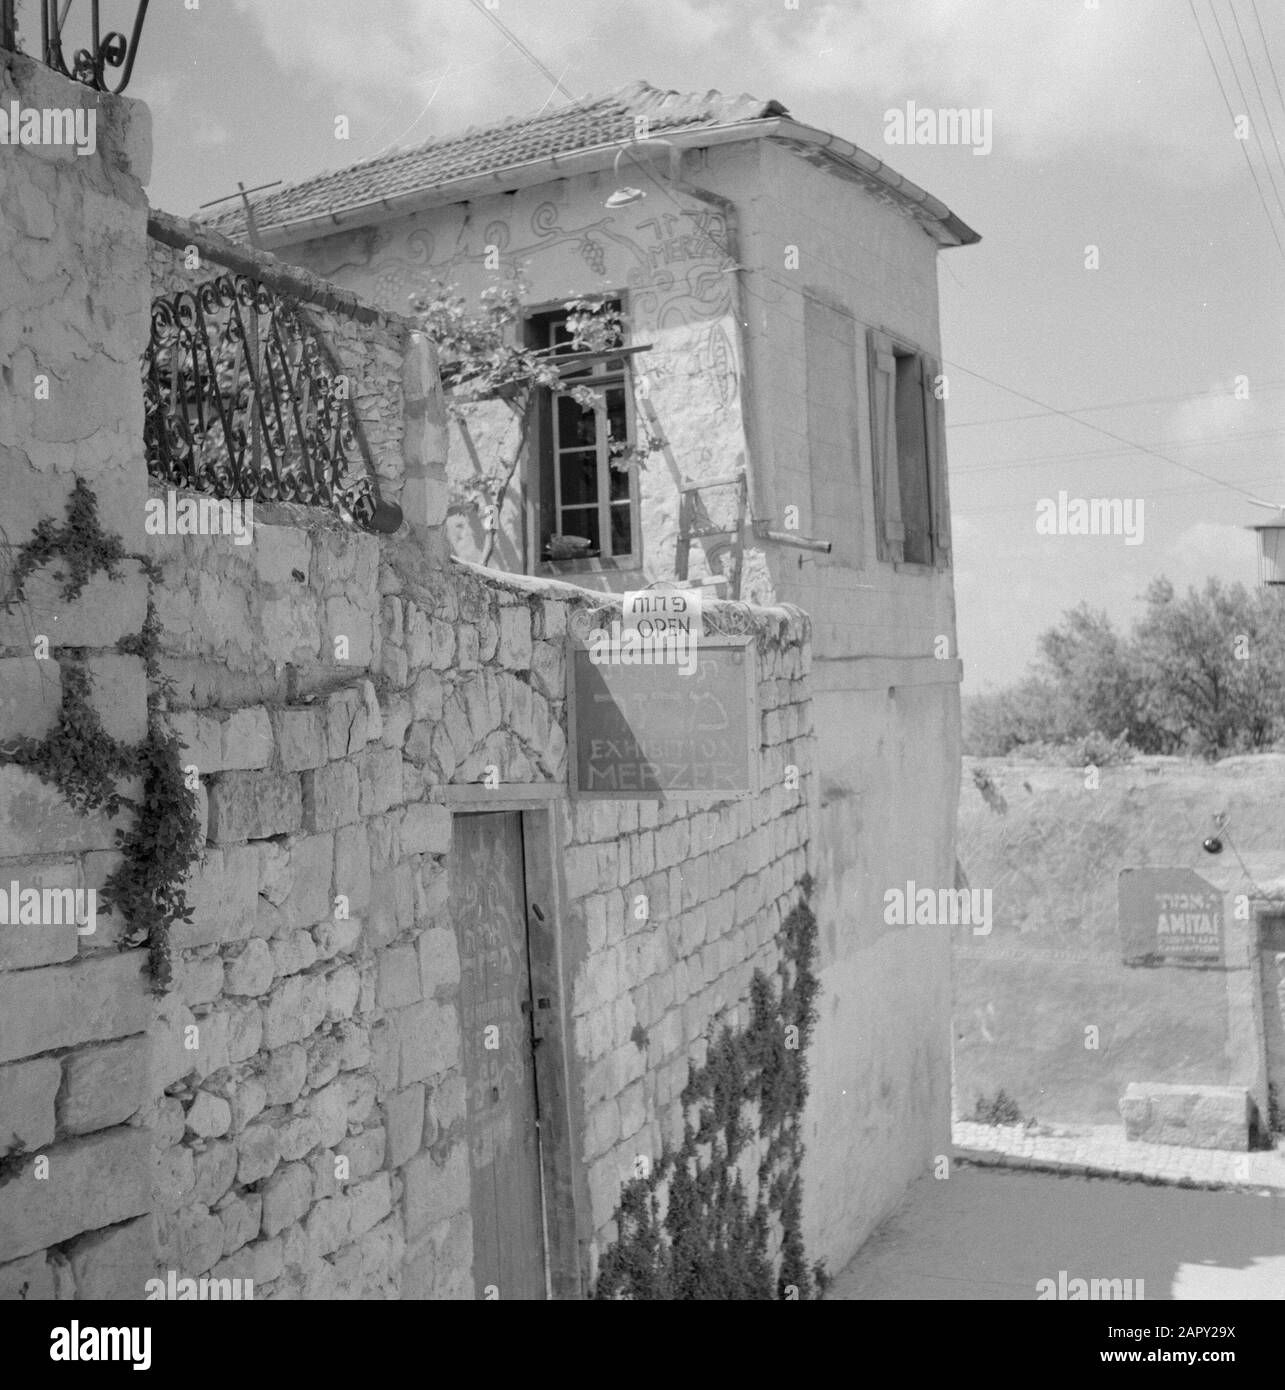 Home and studio of the artist Arieh Merzer and Amitai in the Artist Colony at Safad (Safed) Date: undated Location: Israel, Safad, Safed Keywords: artists, ateliers, village images, artists' colonies, billboards, homes Stock Photo